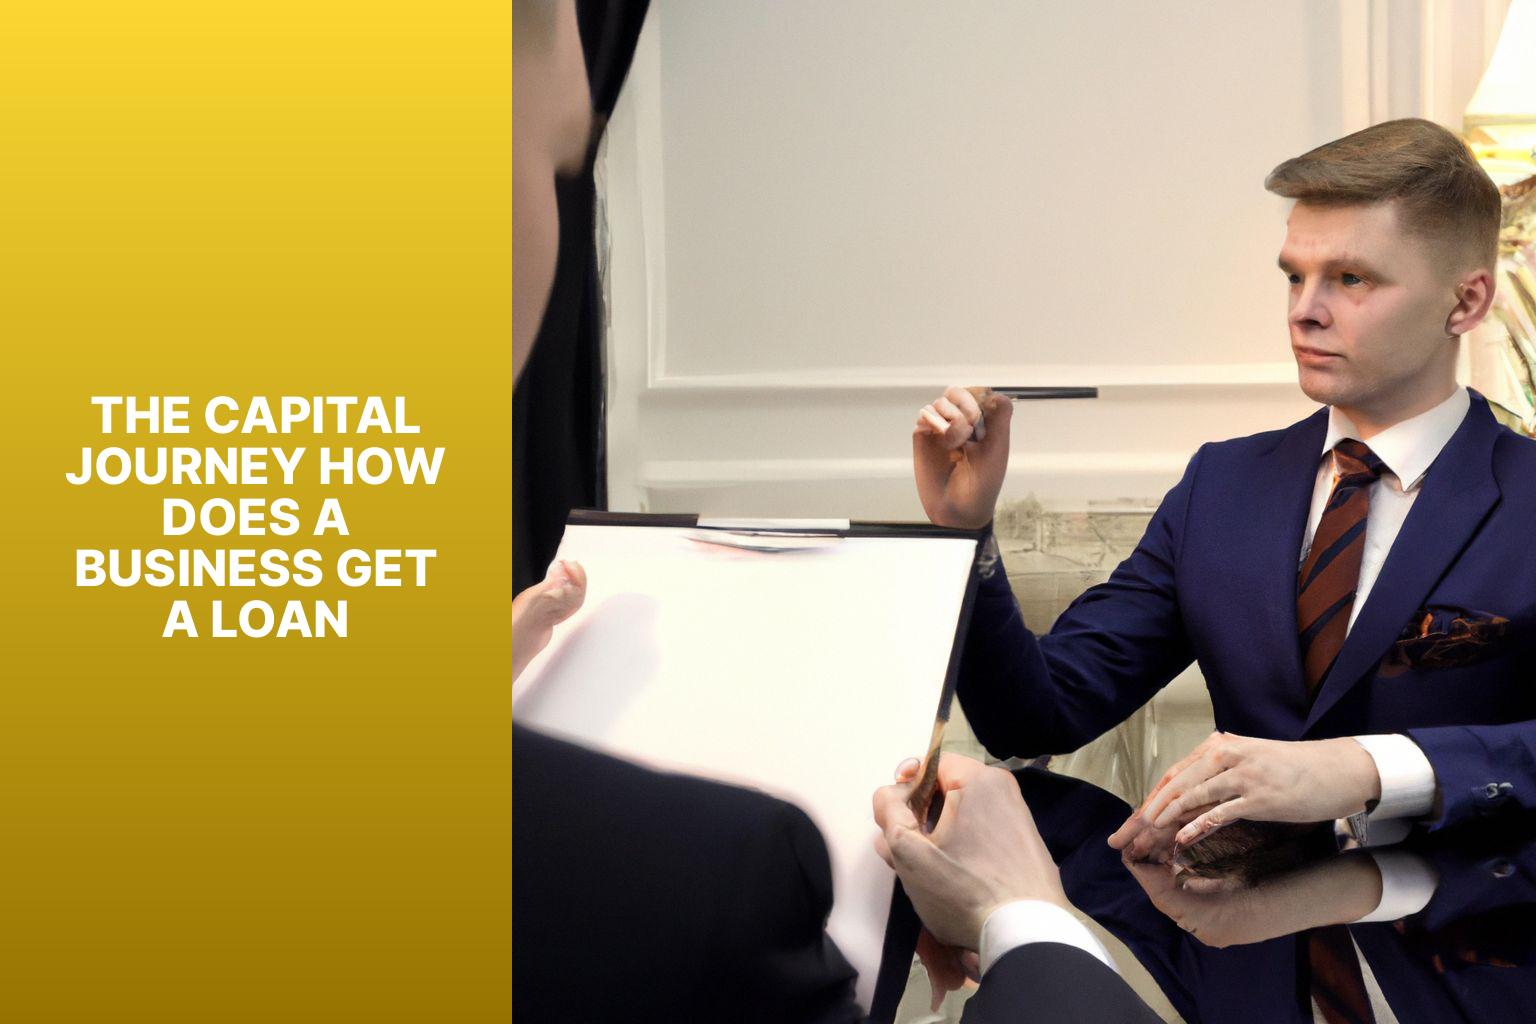 The Capital Journey How Does a Business Get a Loan